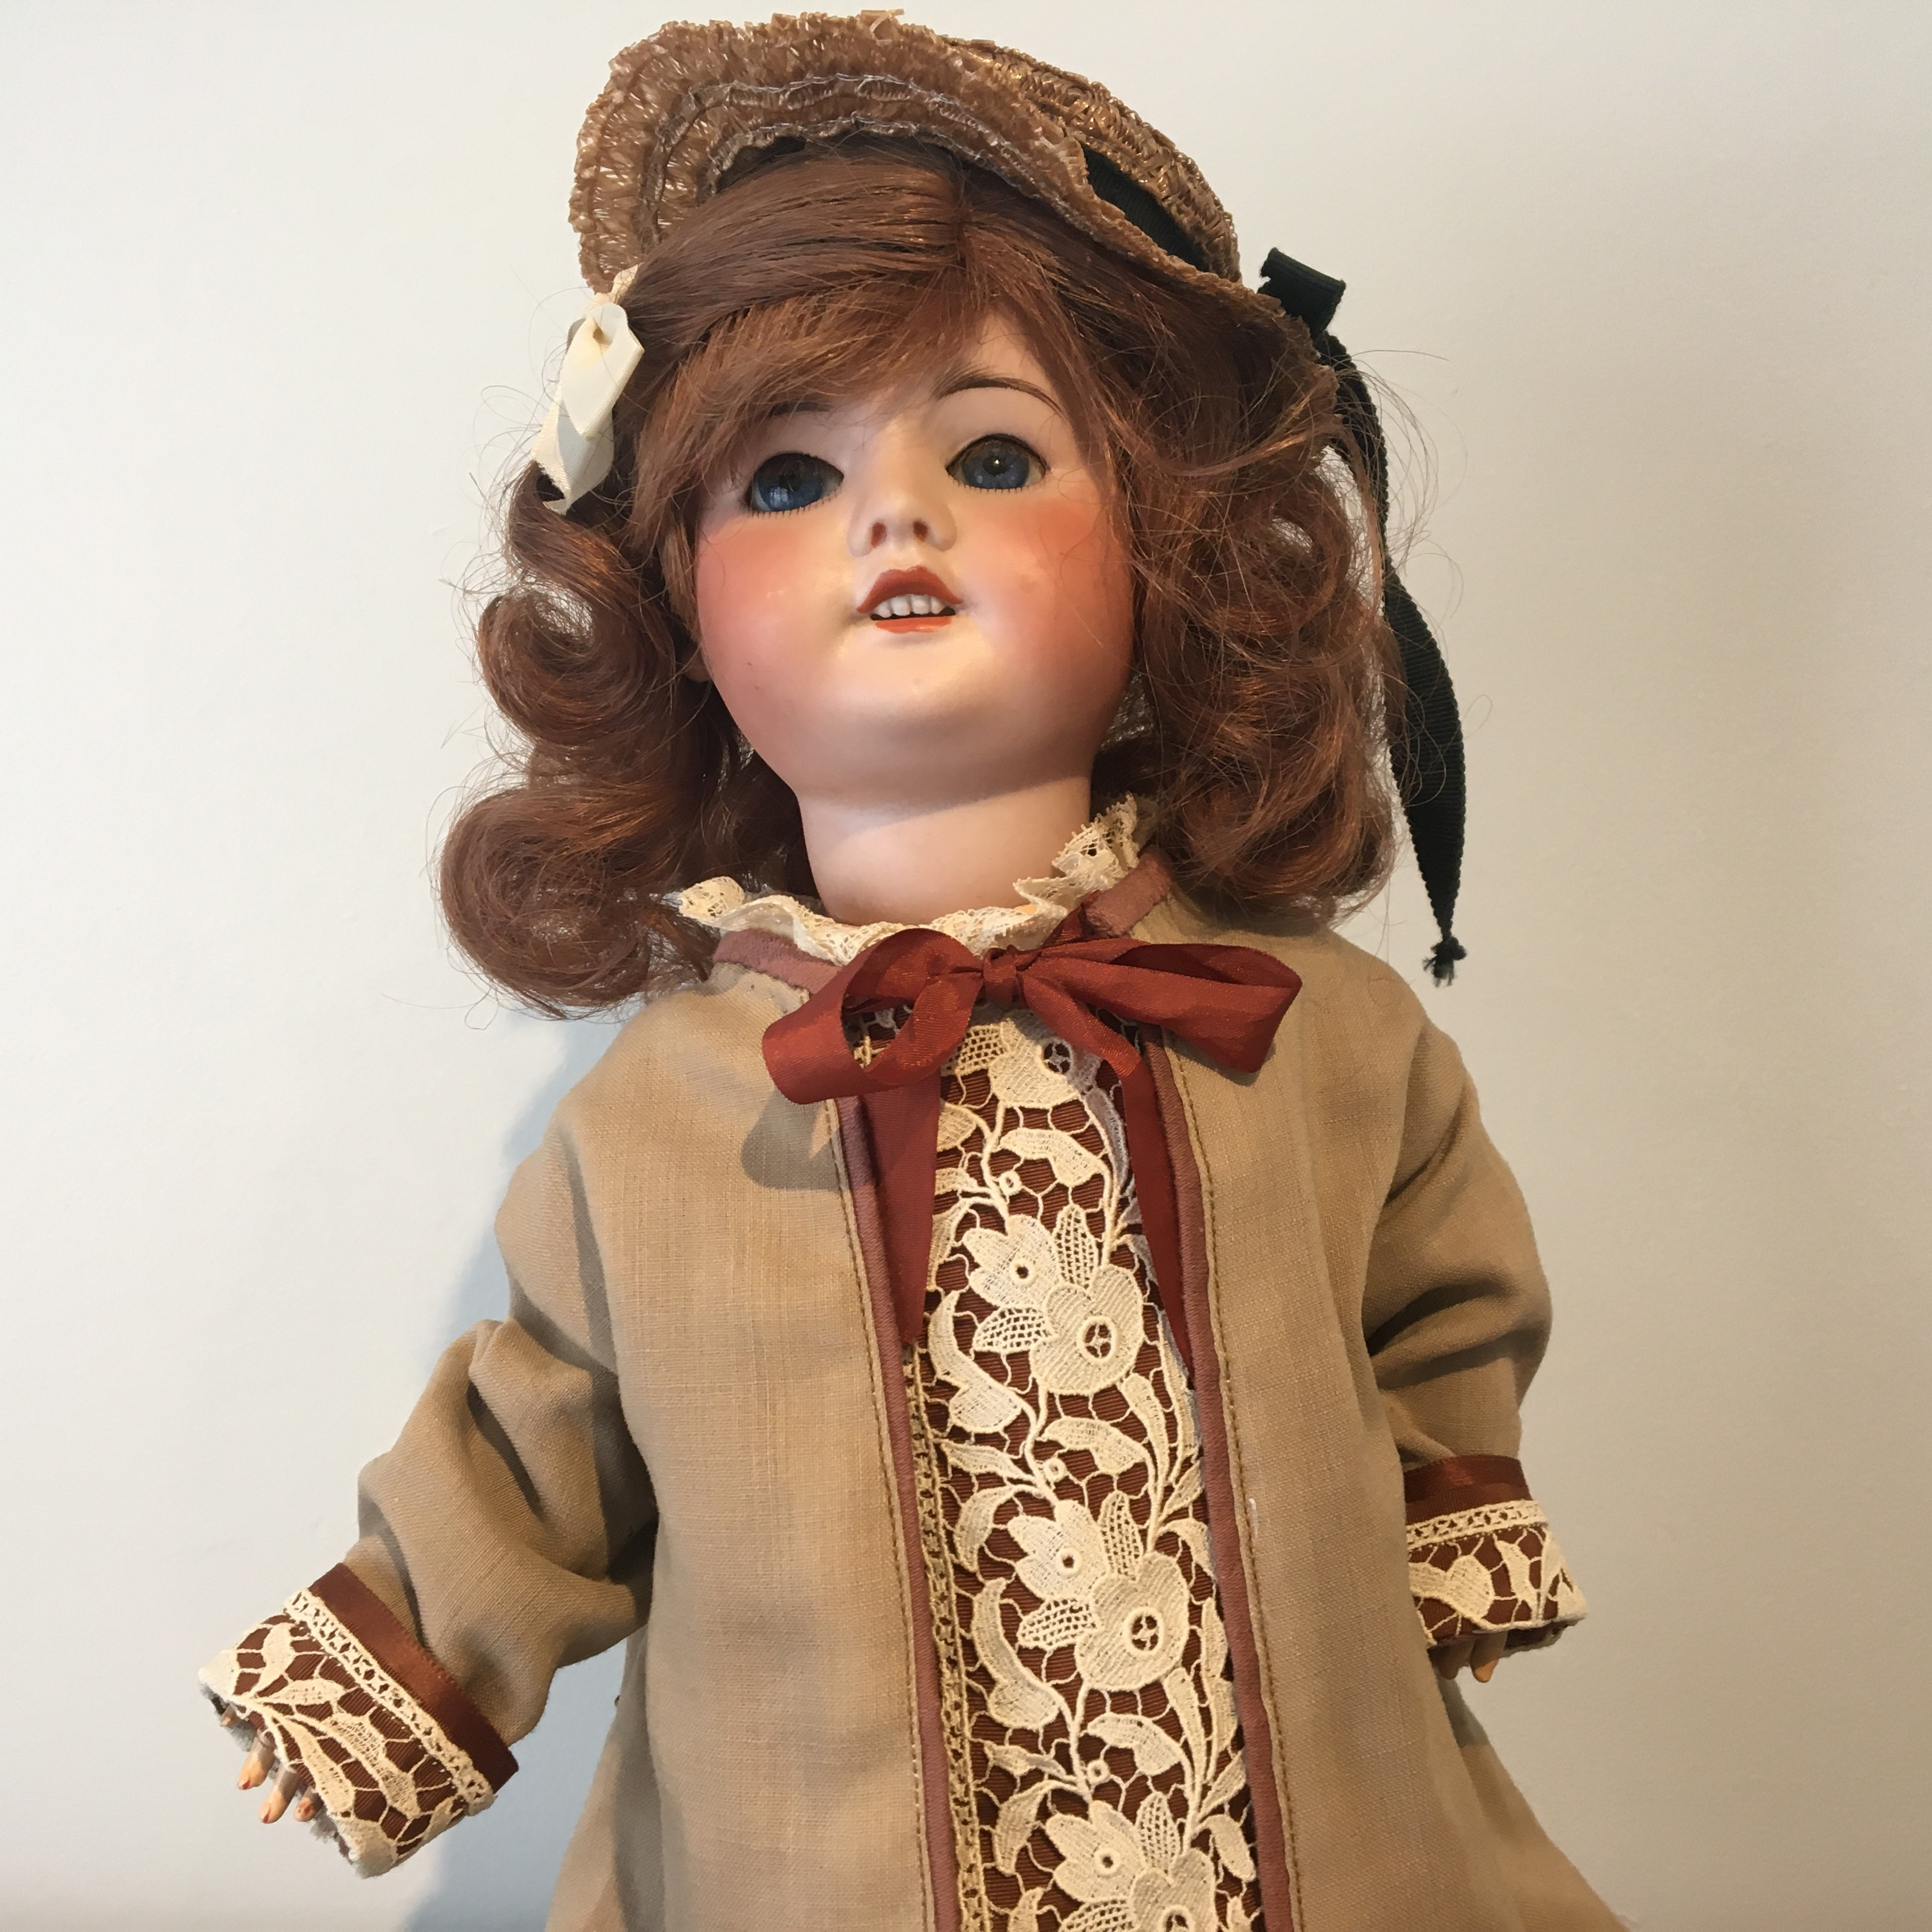 Smiling antique doll with medium brown hair and sleep eyes, with a brown lace-trimmed coat, white skirt, and straw hat